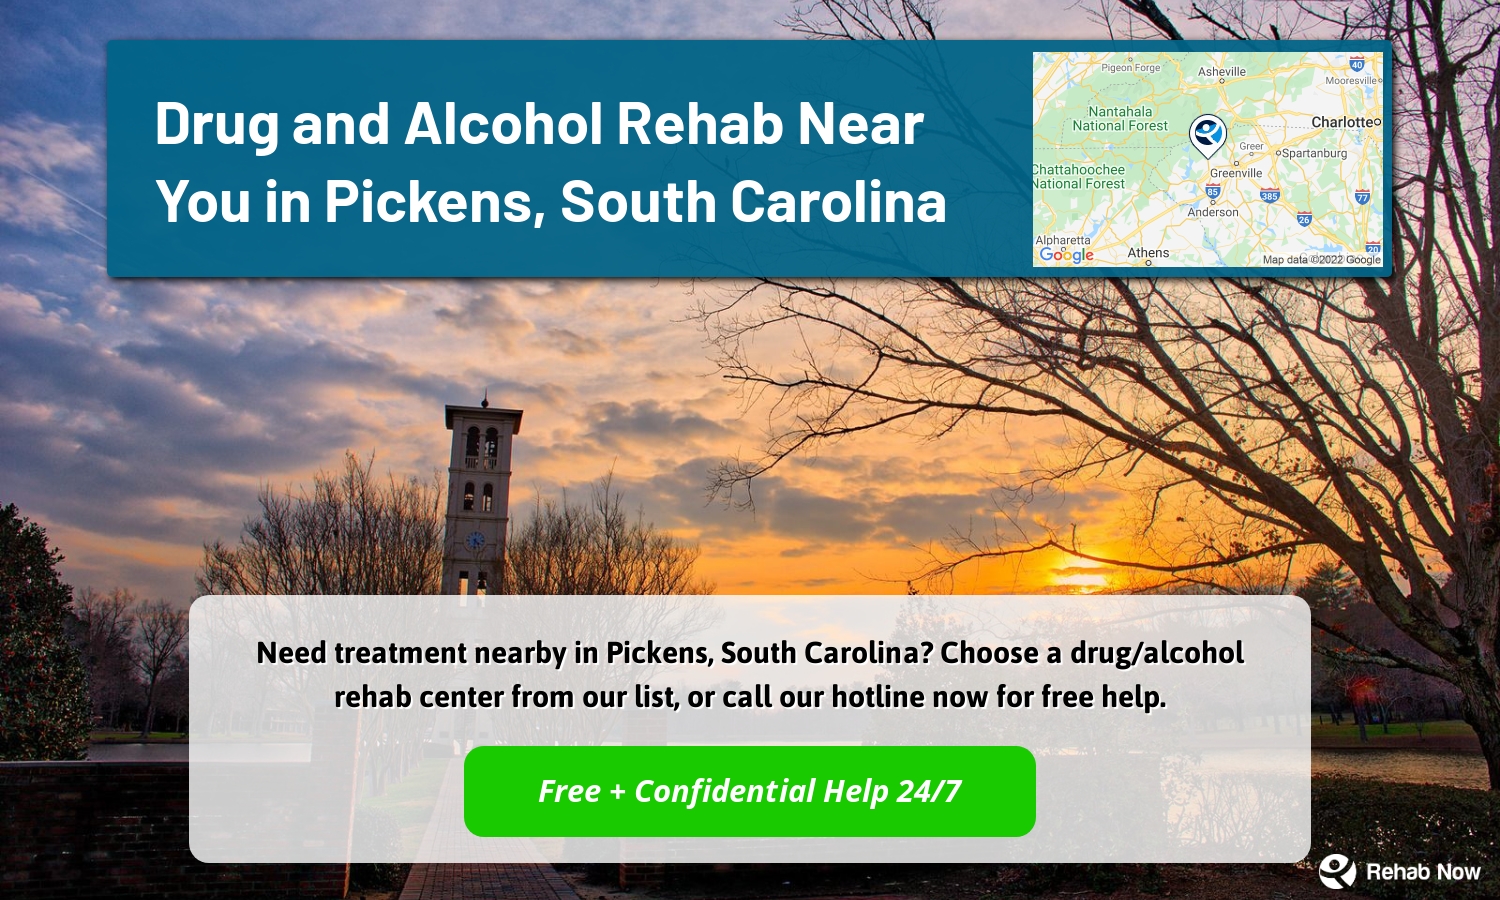 Need treatment nearby in Pickens, South Carolina? Choose a drug/alcohol rehab center from our list, or call our hotline now for free help.